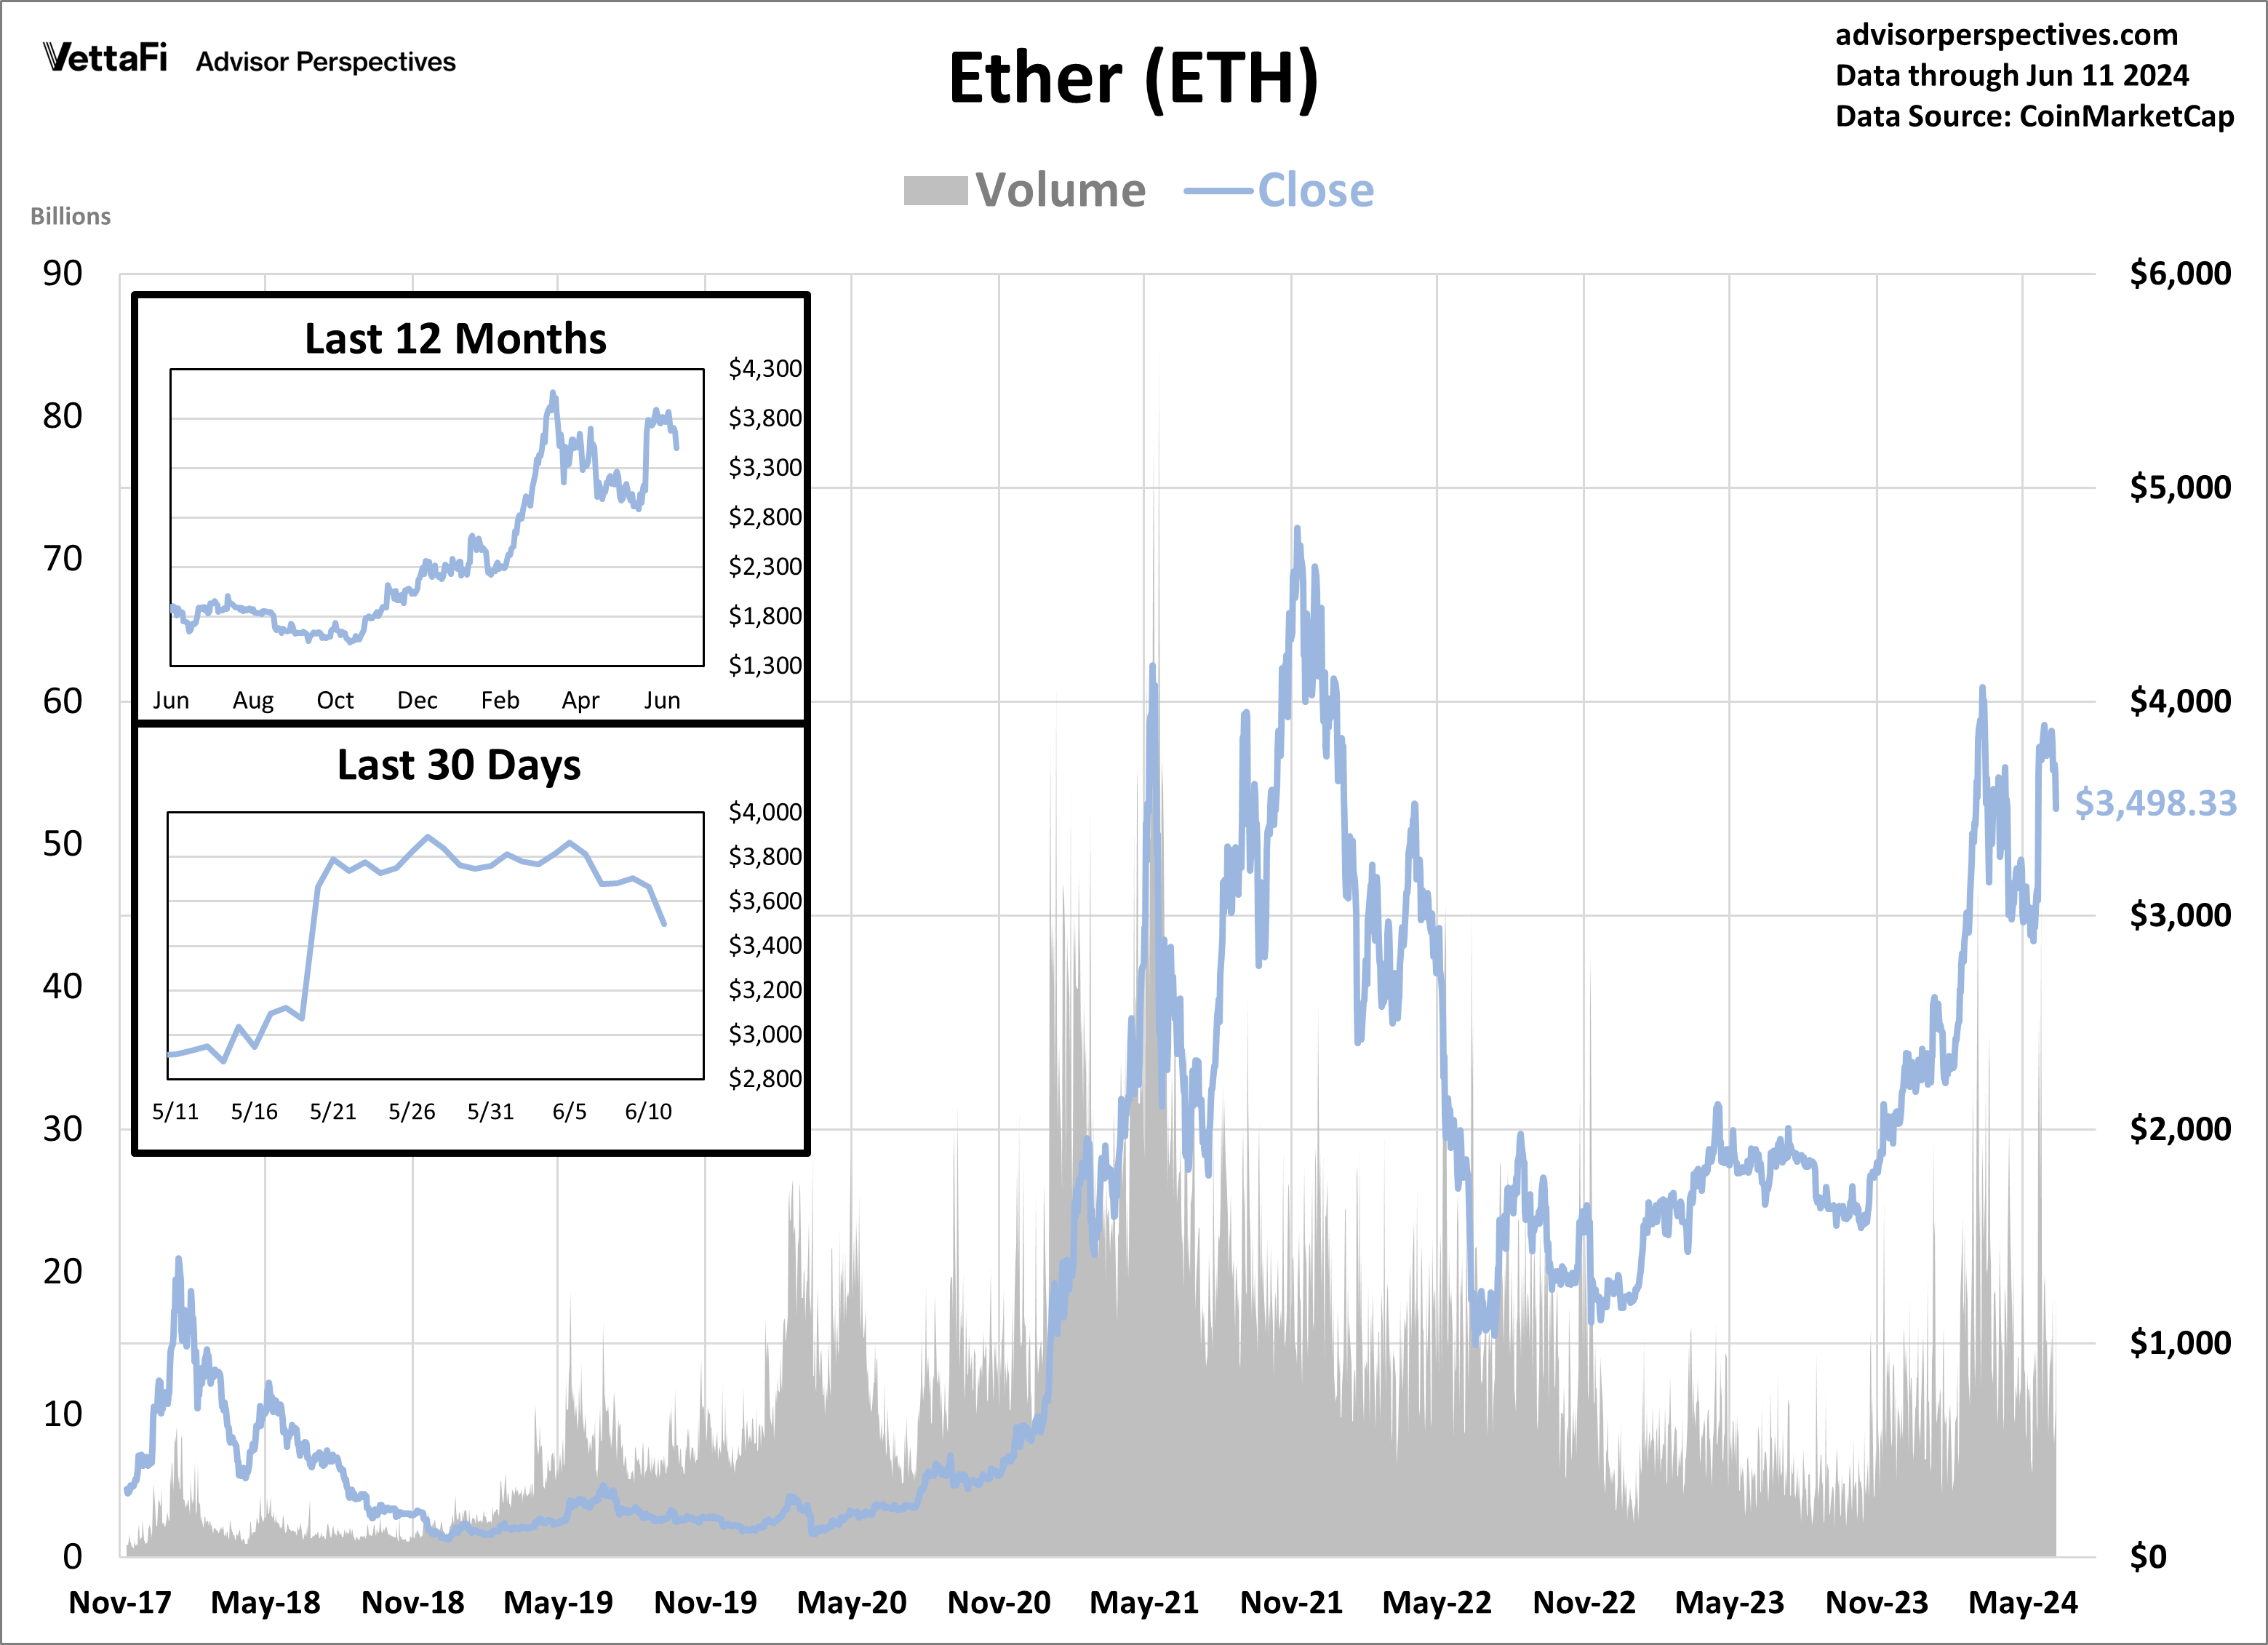 Ether Volume and Close